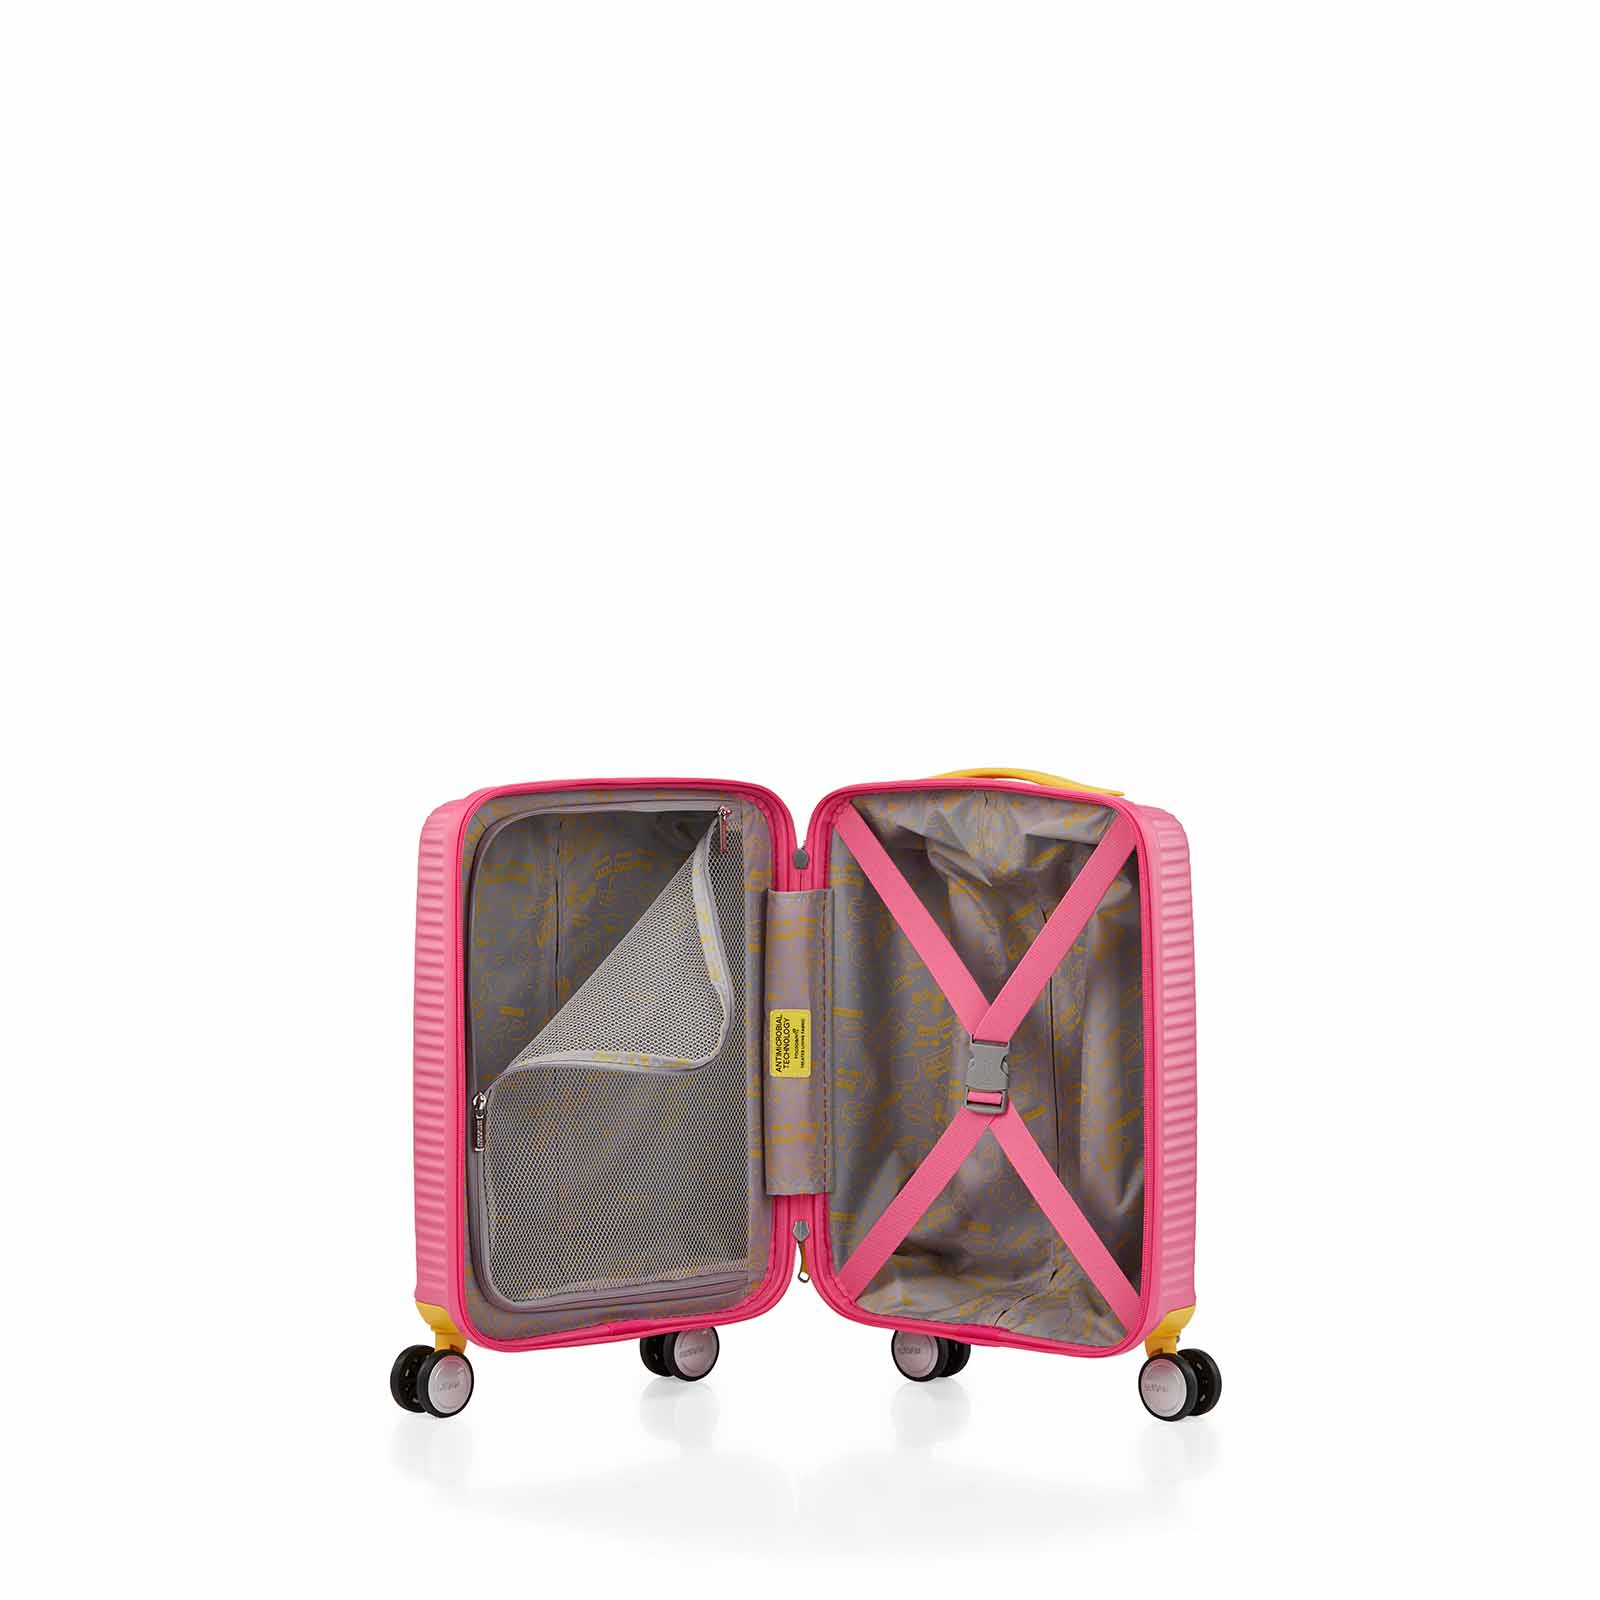 American-Tourister-Little-Curio-47cm-Carry-On-Suitcase-Pink-Yellow-Open